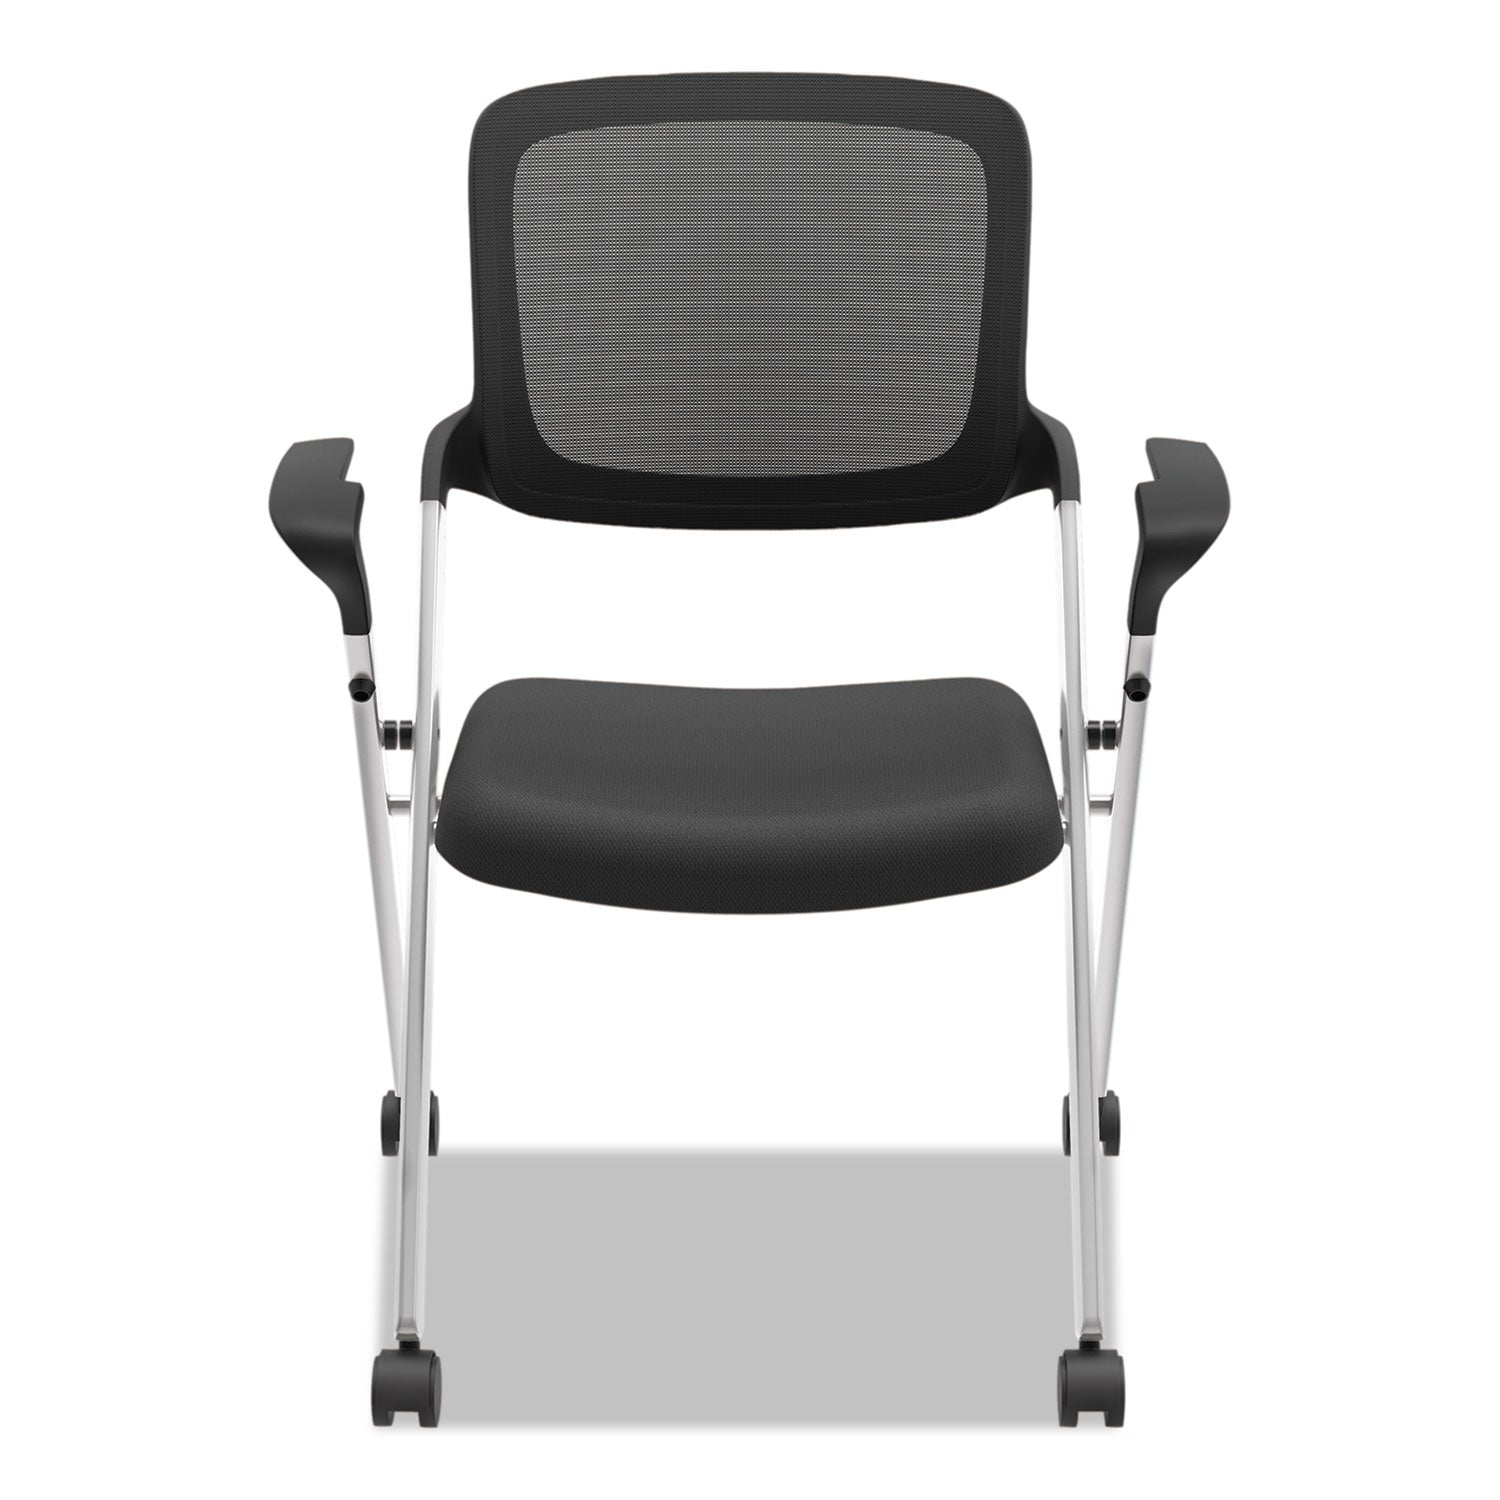 vl314-mesh-back-nesting-chair-supports-up-to-250-lb-19-seat-height-black-seat-black-back-silver-base_bsxvl314slvr - 1